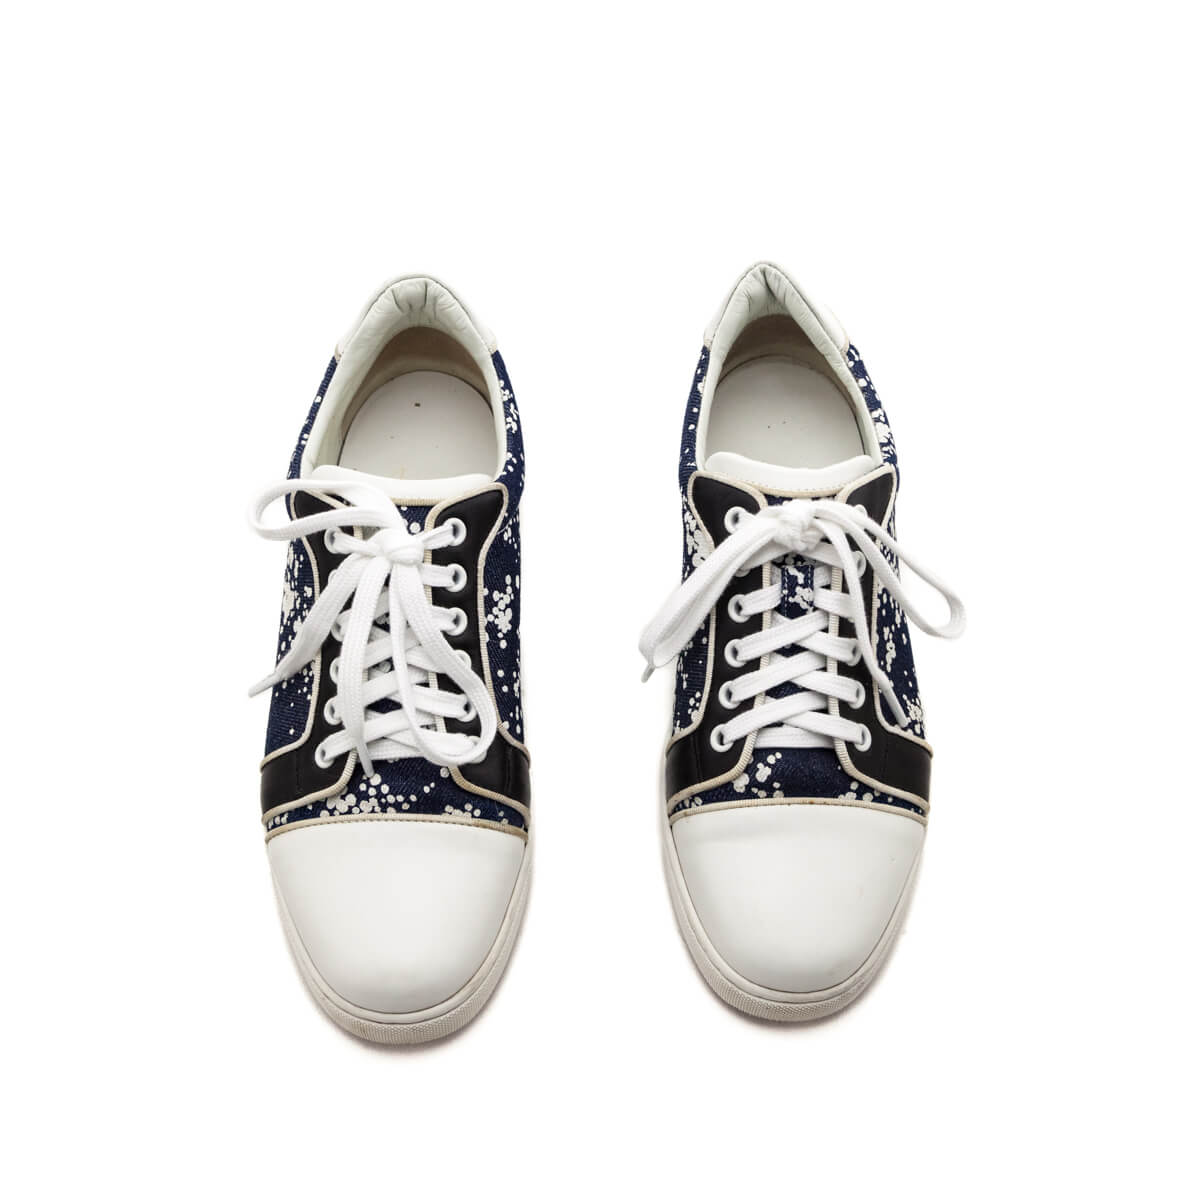 Christian Louboutin Navy & White Paint Low Top Sneakers Size US 8 | EU 38 - Love that Bag etc - Preowned Authentic Designer Handbags & Preloved Fashions